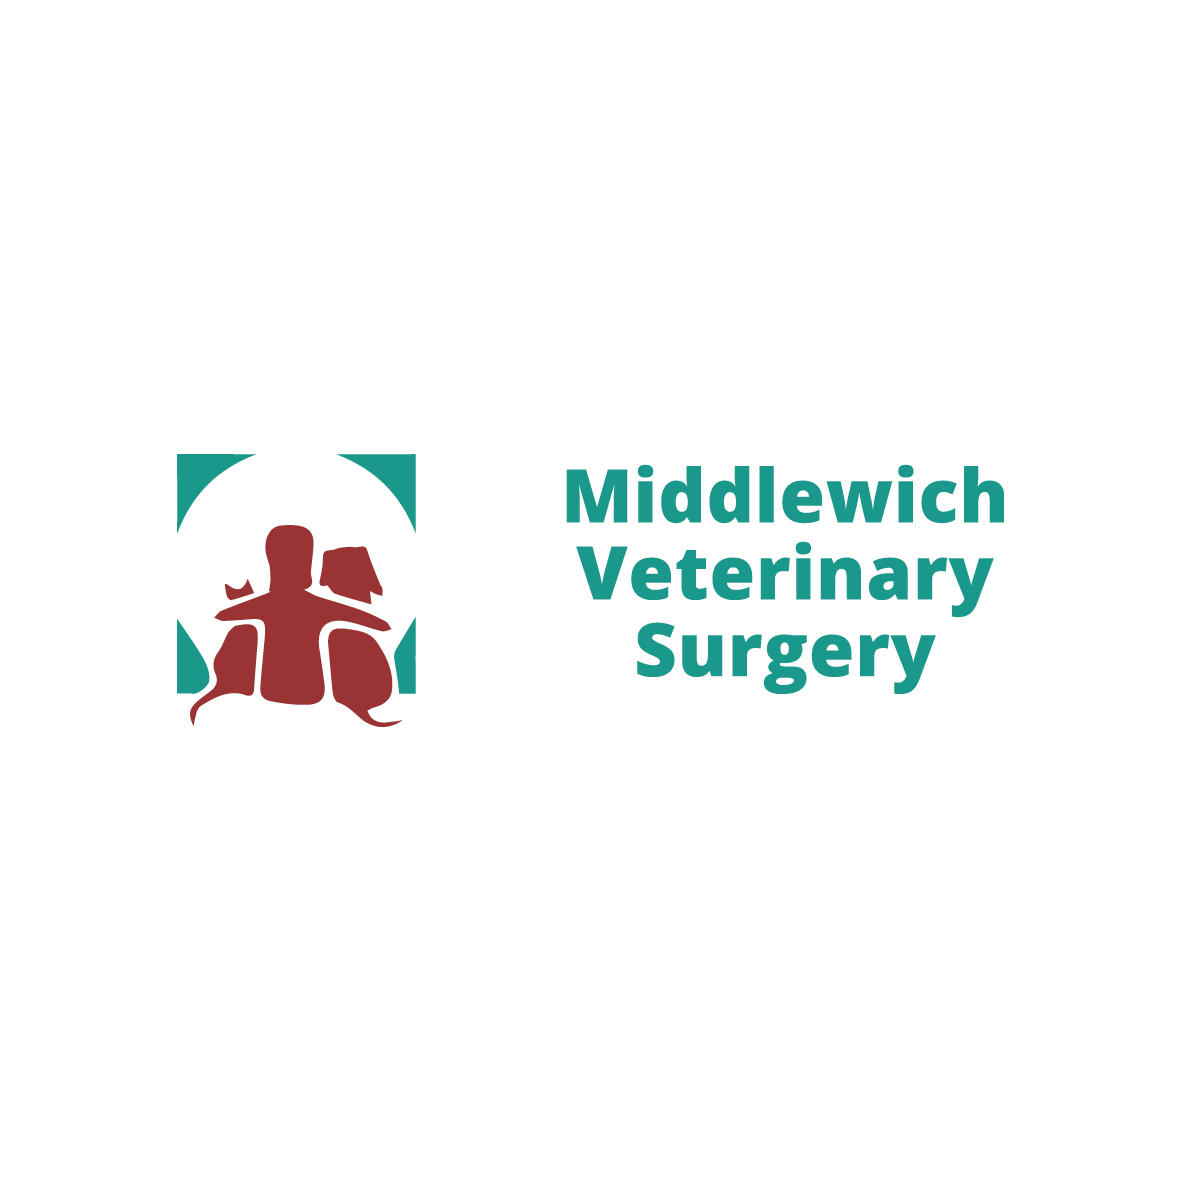 Willows Veterinary Group - Middlewich Veterinary Surgery Middlewich 01606 833731